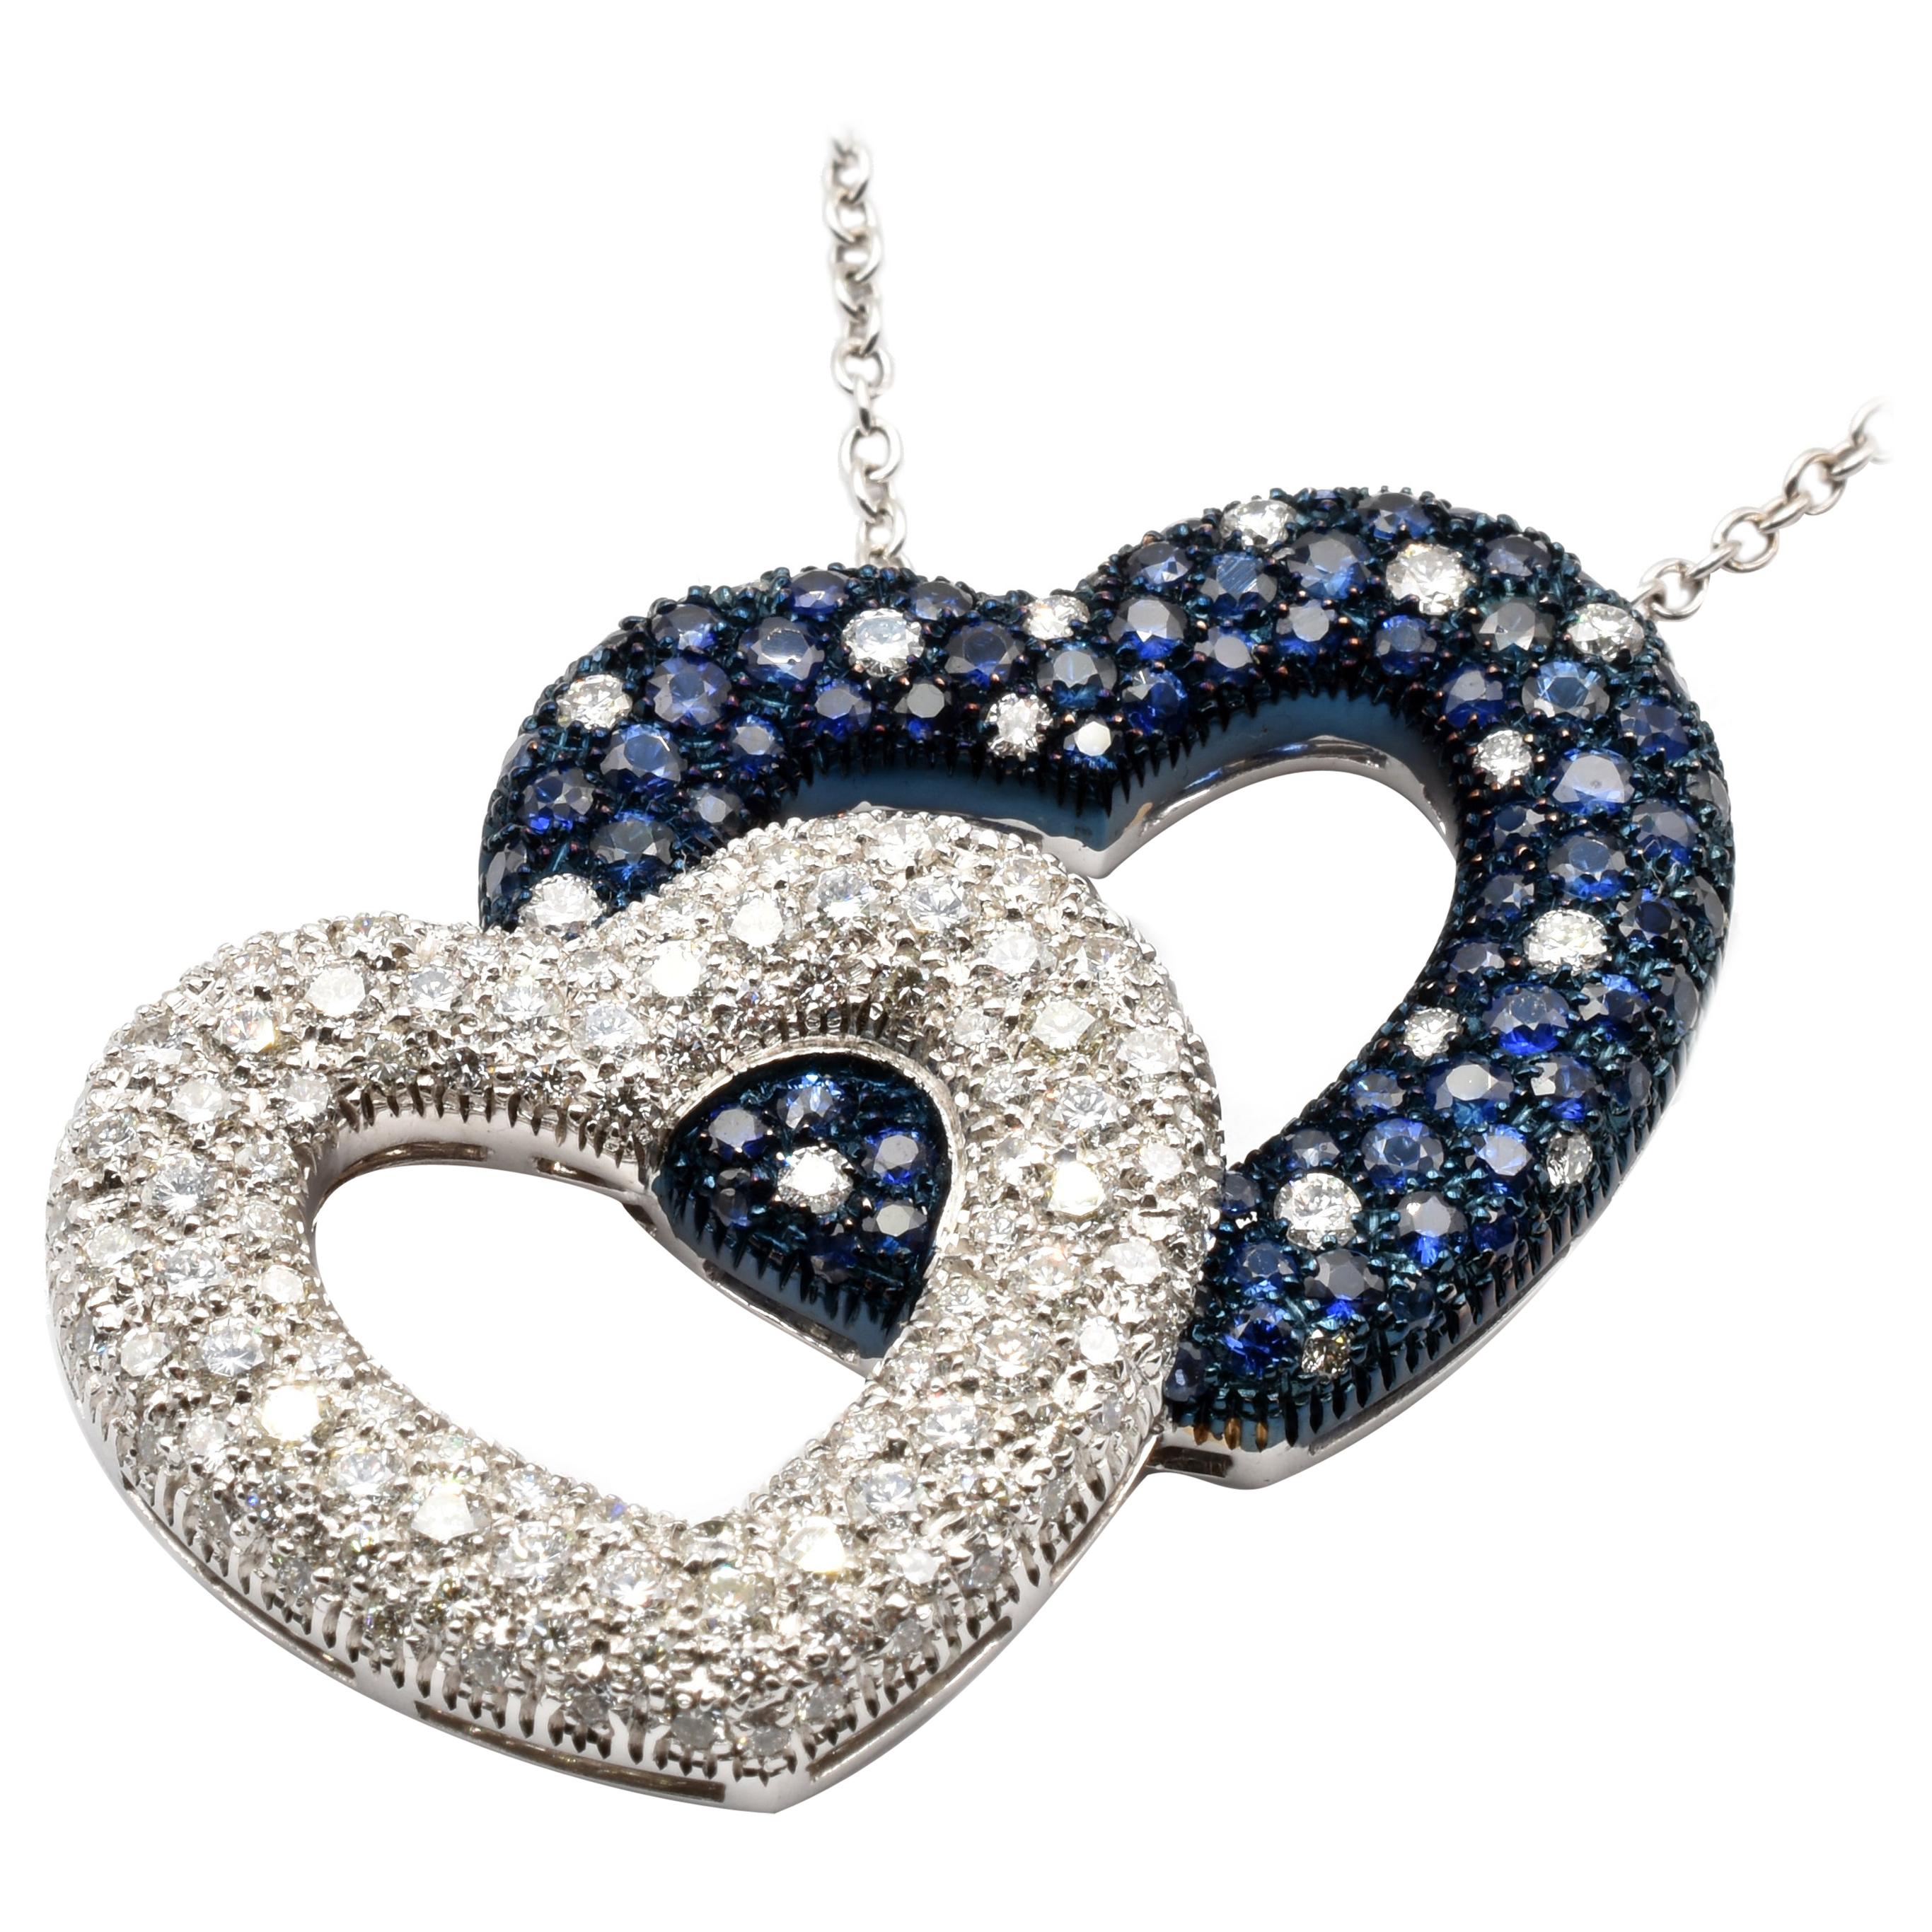 Diamonds and Sapphires White Gold Heart Pendant Necklace, Made in Italy